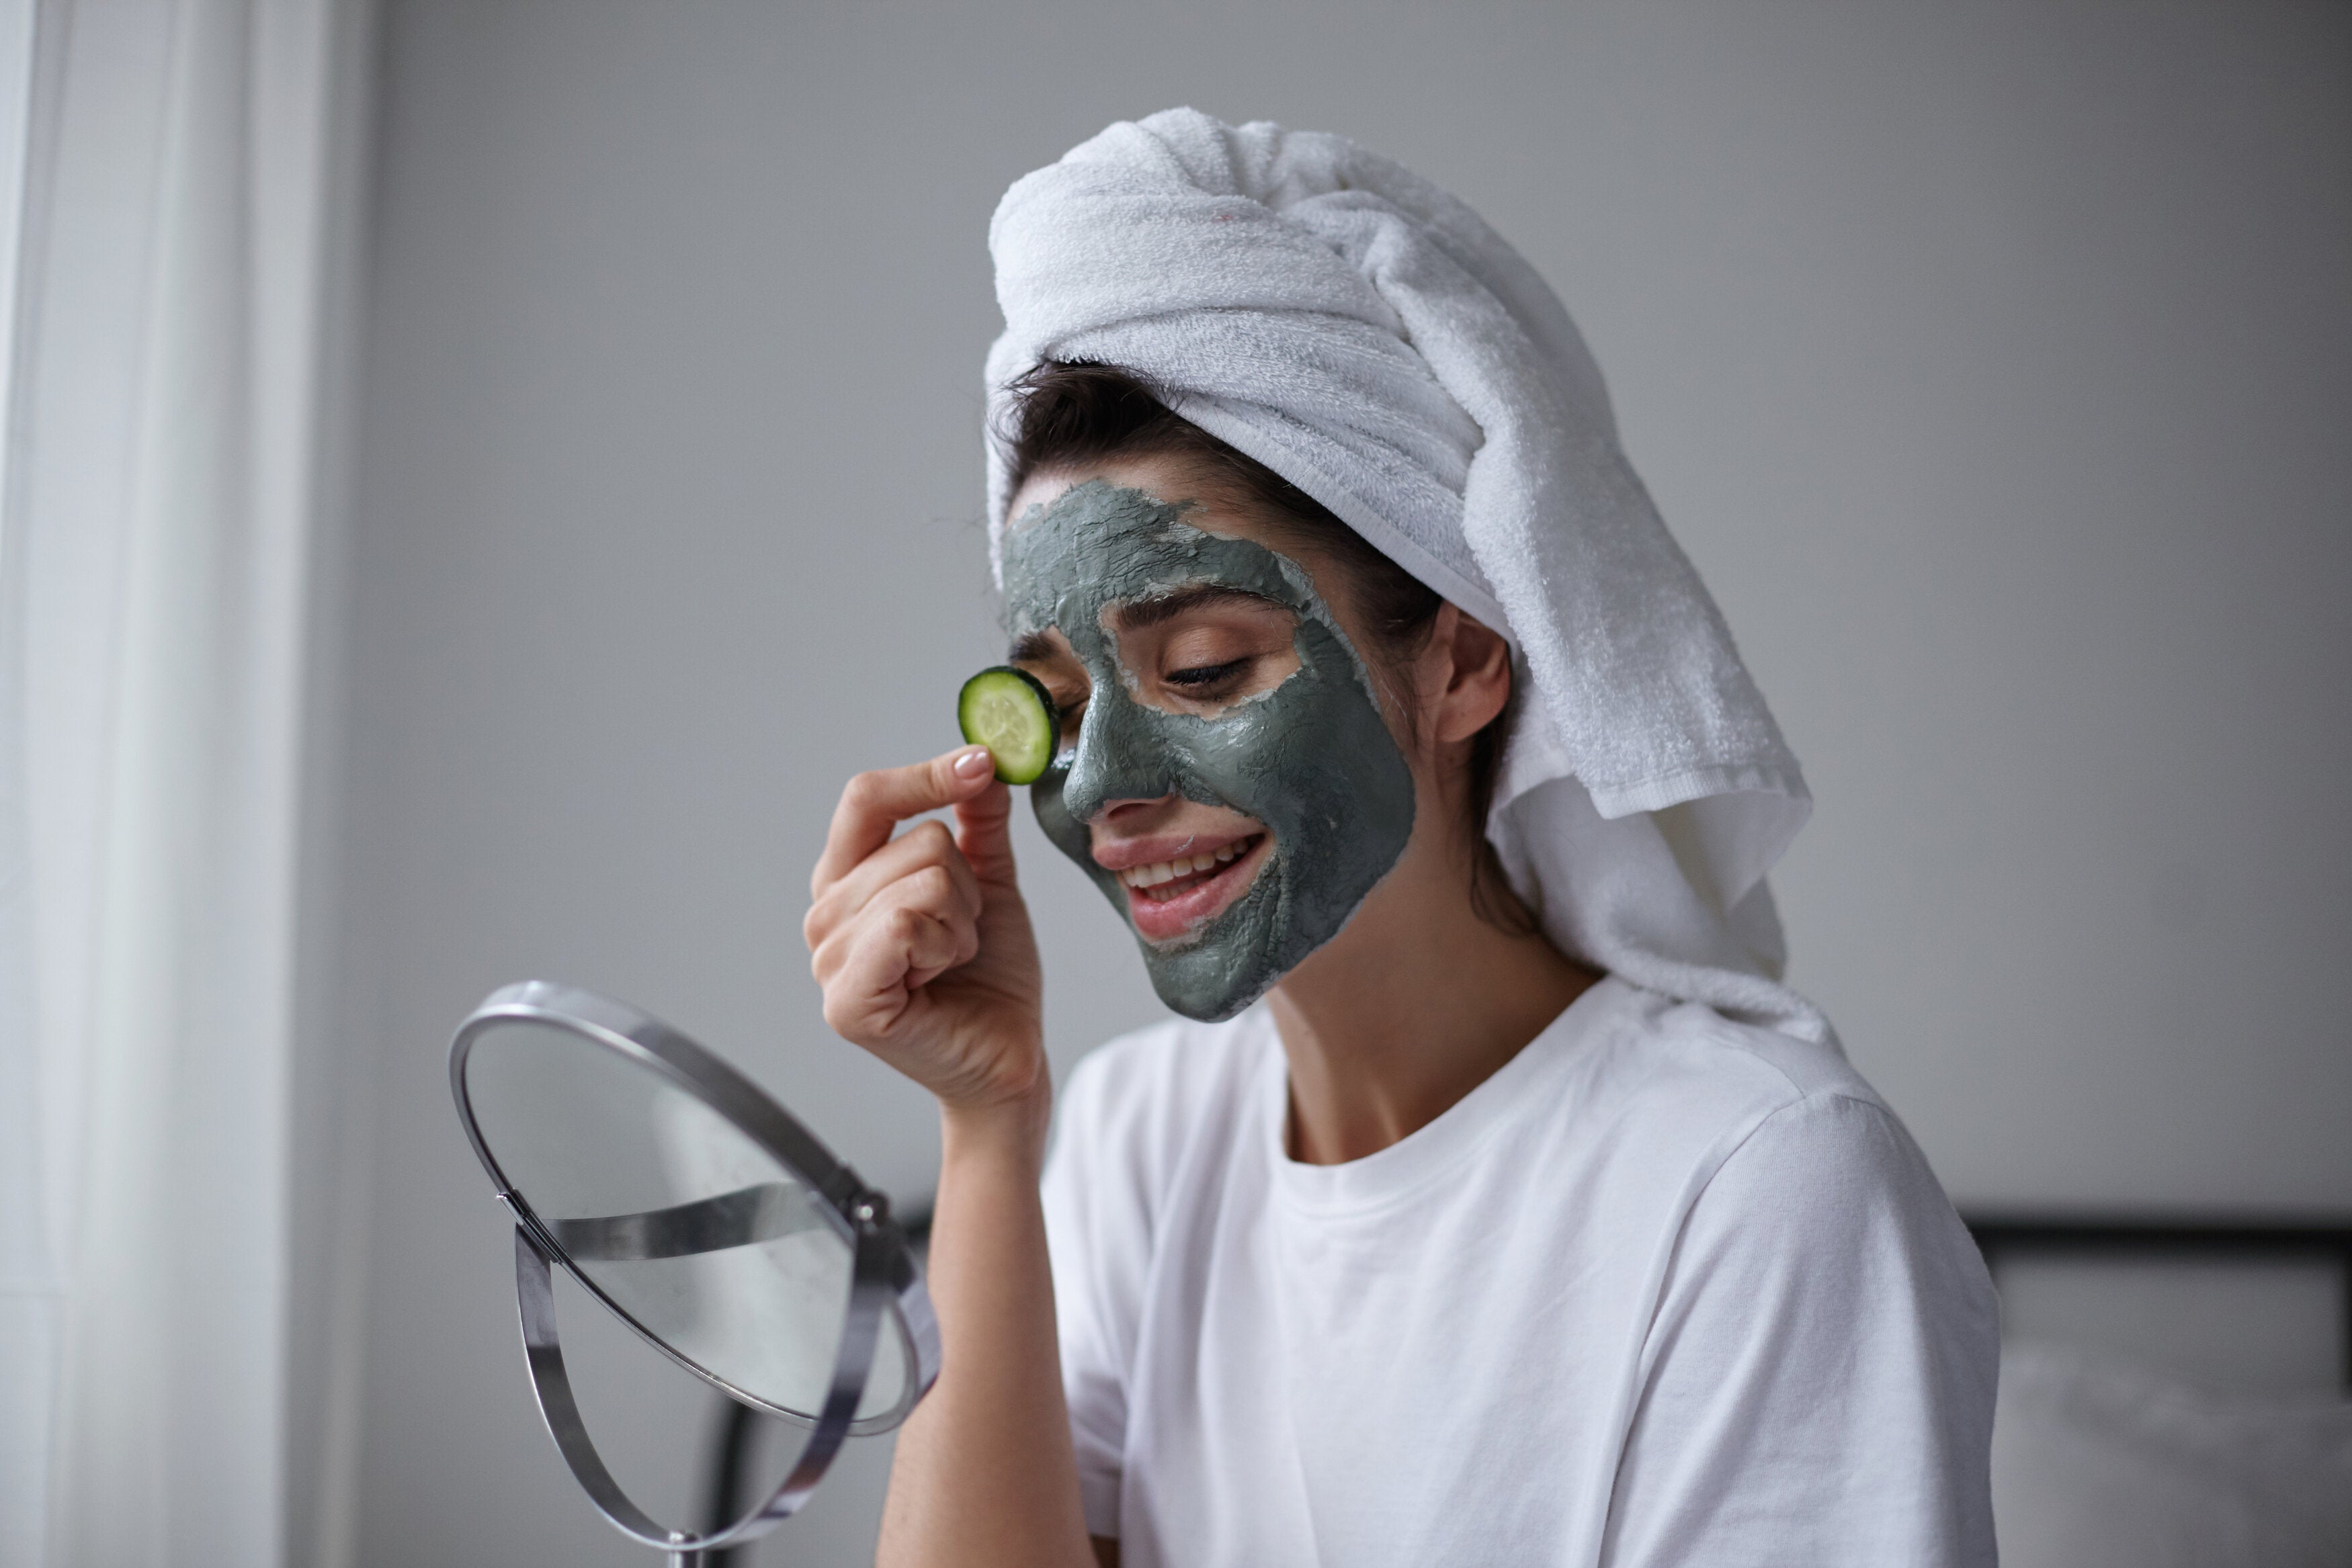 A woman use old cucumbers to reduce eye puffiness as a home spa